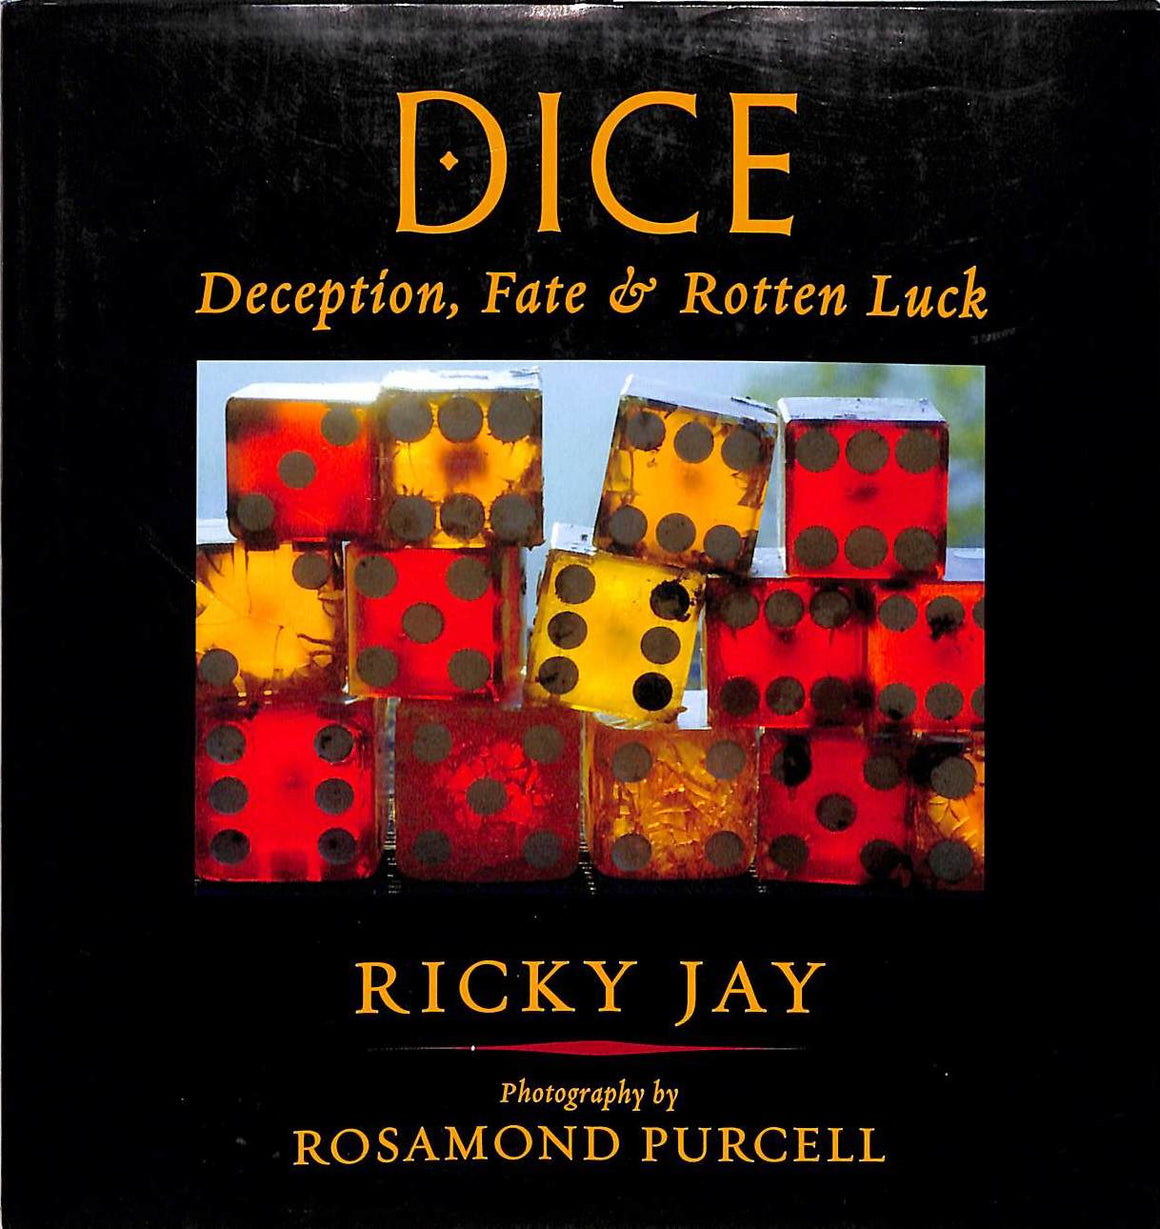 "Dice: Deception, Fate & Rotten Luck" 2003 JAY, Ricky